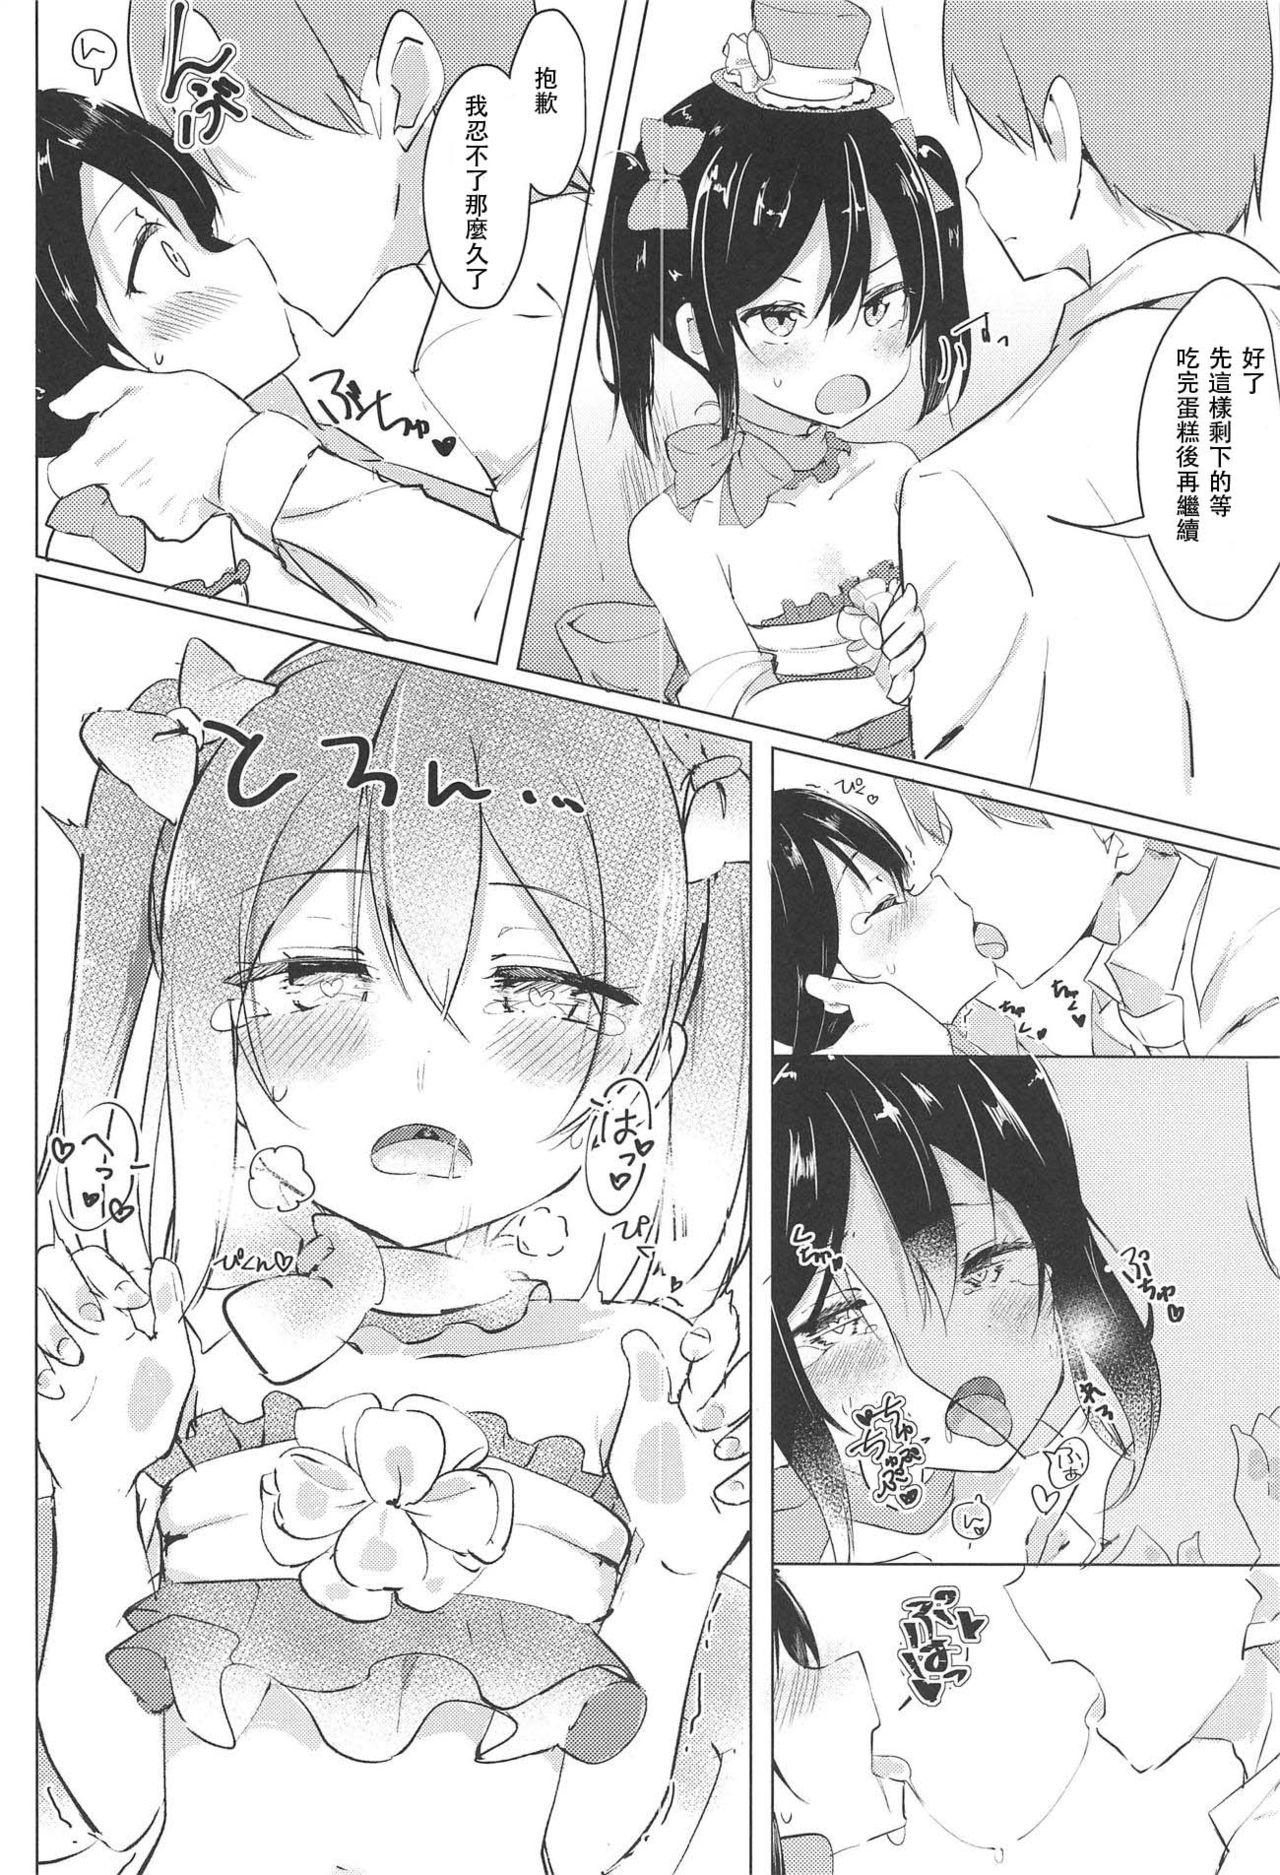 Blonde Smile for you. - Love live Rough Porn - Page 8